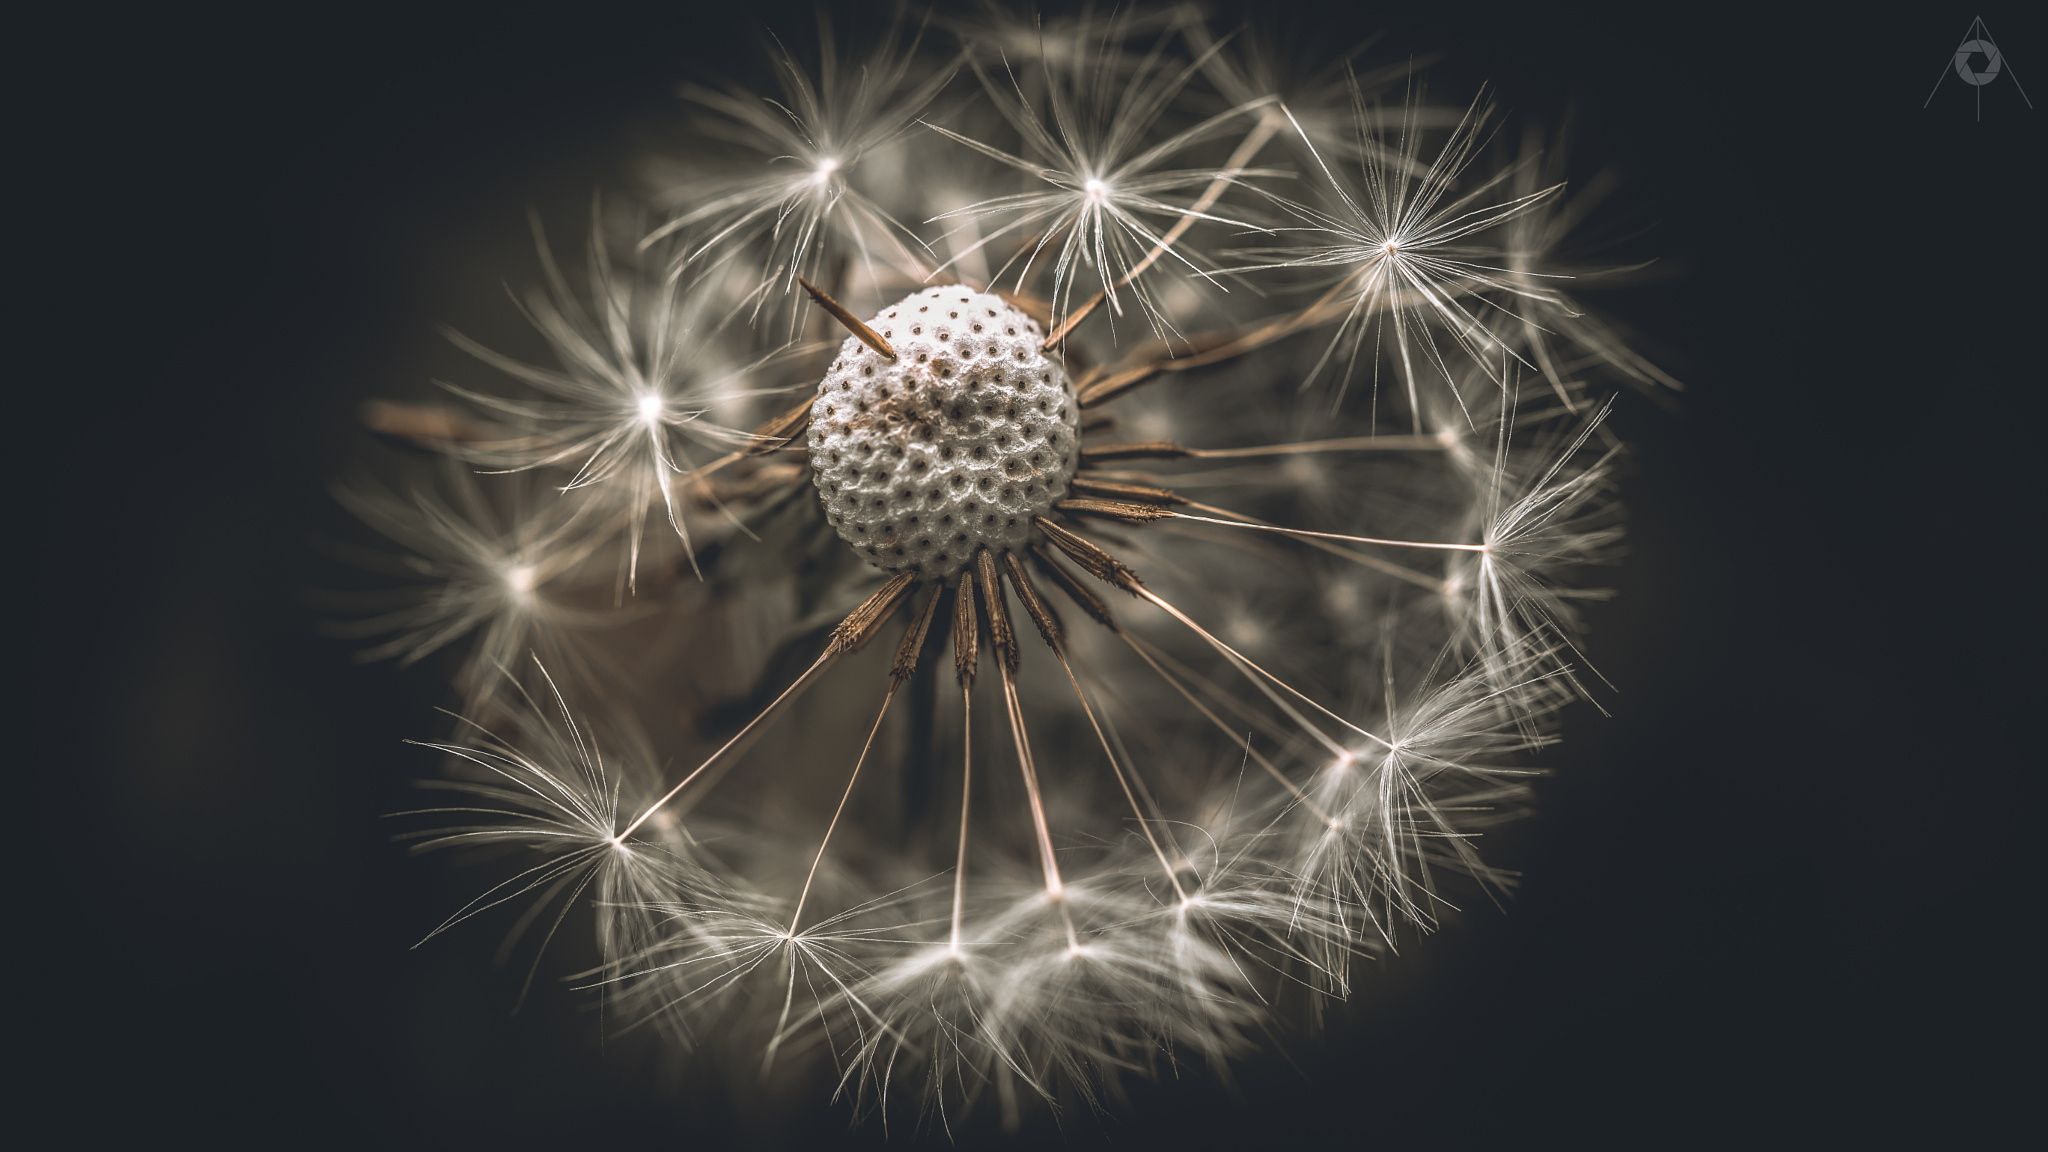 Going Bald - A gritty, macro image of a Dandelion fruit. Another ...